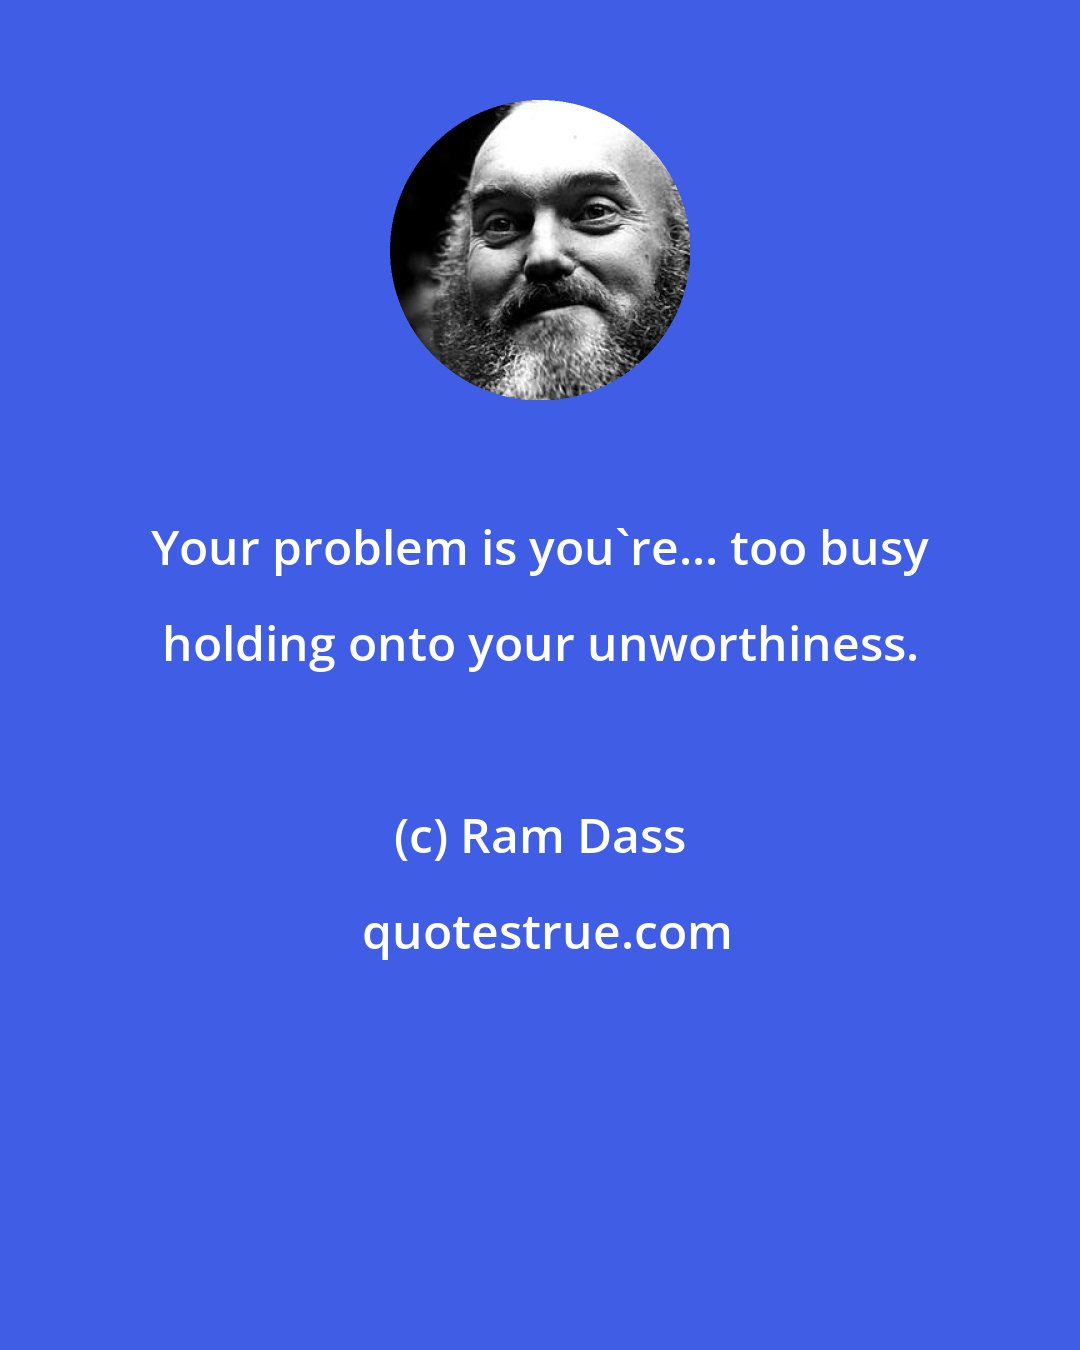 Ram Dass: Your problem is you're... too busy holding onto your unworthiness.